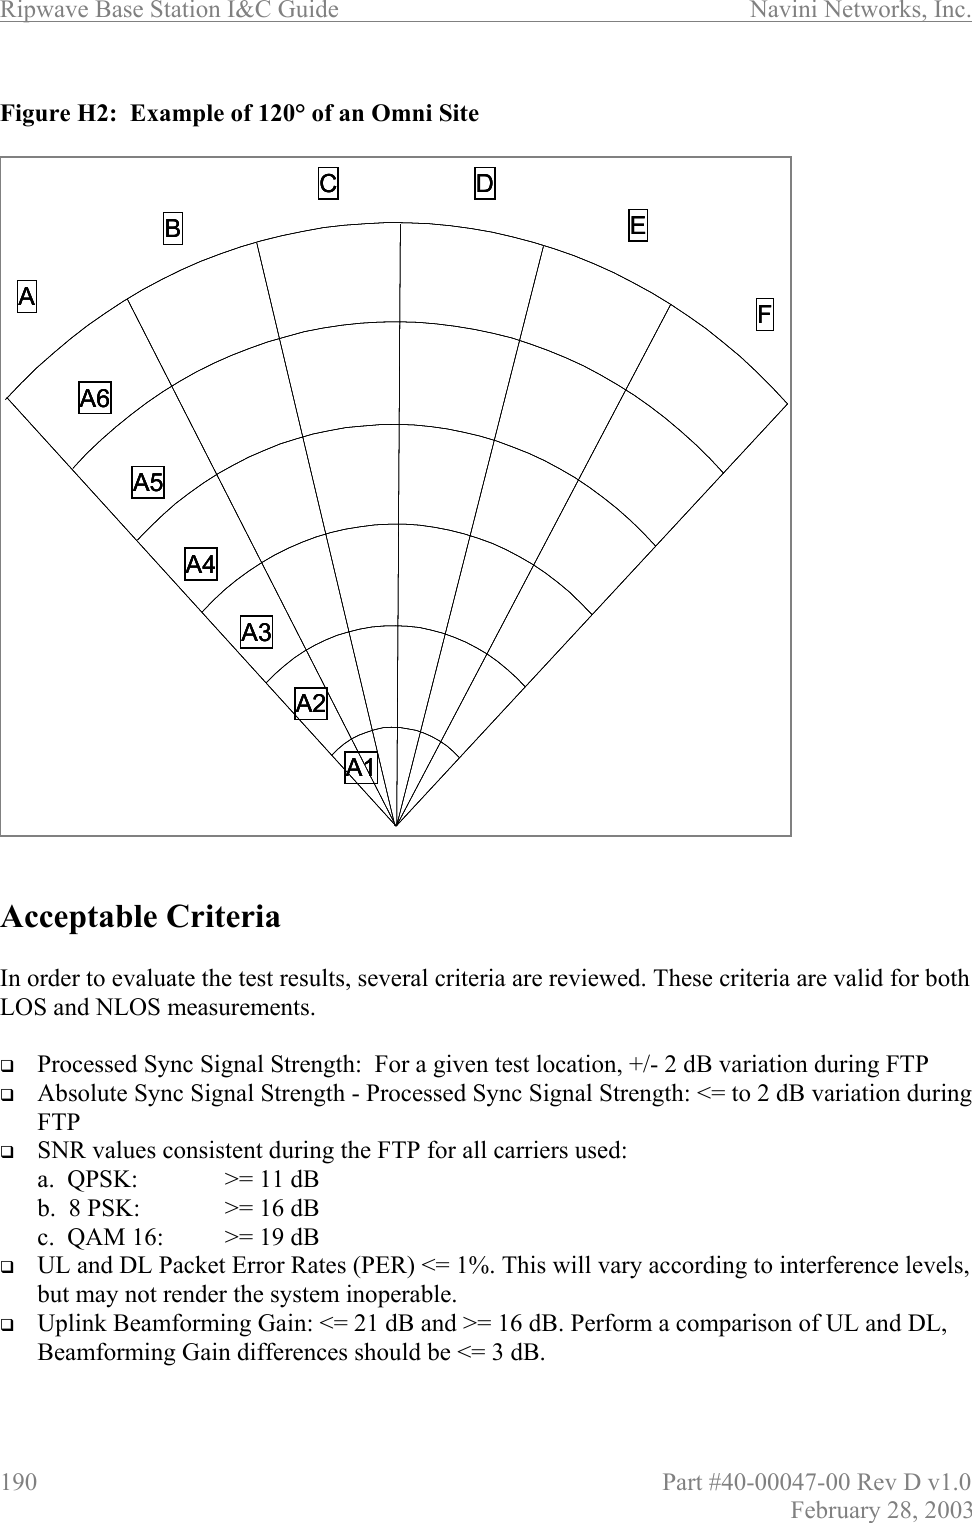 Ripwave Base Station I&amp;C Guide                      Navini Networks, Inc. 190                          Part #40-00047-00 Rev D v1.0 February 28, 2003  Figure H2:  Example of 120° of an Omni Site    Acceptable Criteria  In order to evaluate the test results, several criteria are reviewed. These criteria are valid for both LOS and NLOS measurements.     Processed Sync Signal Strength:  For a given test location, +/- 2 dB variation during FTP   Absolute Sync Signal Strength - Processed Sync Signal Strength: &lt;= to 2 dB variation during FTP   SNR values consistent during the FTP for all carriers used: a.  QPSK:    &gt;= 11 dB b.  8 PSK:    &gt;= 16 dB c.  QAM 16:  &gt;= 19 dB   UL and DL Packet Error Rates (PER) &lt;= 1%. This will vary according to interference levels, but may not render the system inoperable.   Uplink Beamforming Gain: &lt;= 21 dB and &gt;= 16 dB. Perform a comparison of UL and DL, Beamforming Gain differences should be &lt;= 3 dB.  ABC DEFA1A2A3A4A5A6ABC DEFA1A2A3A4A5A6ABC DEFA1A2A3A4A5A6